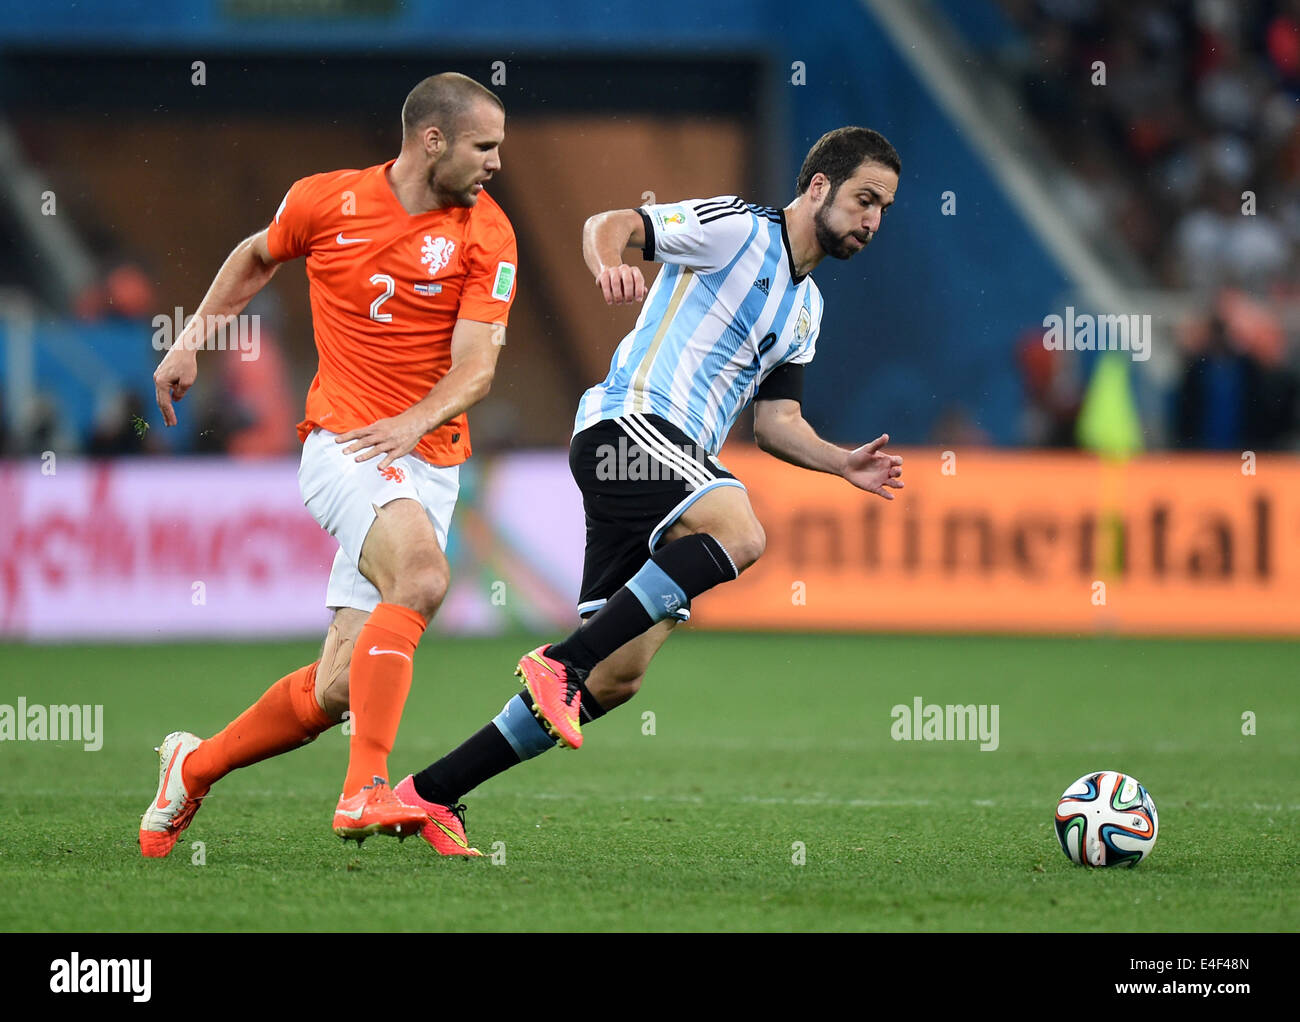 Sao Paulo, Brazil. 09th July, 2014. Gonzalo Higuain of Argentina and Ron Vlaar (L) of the Netherlands vie for the ball during the FIFA World Cup 2014 semi-final soccer match between the Netherlands and Argentina at the Arena Corinthians in Sao Paulo, Brazil, 09 July 2014. Photo: Marius Becker/dpa/Alamy Live News Stock Photo